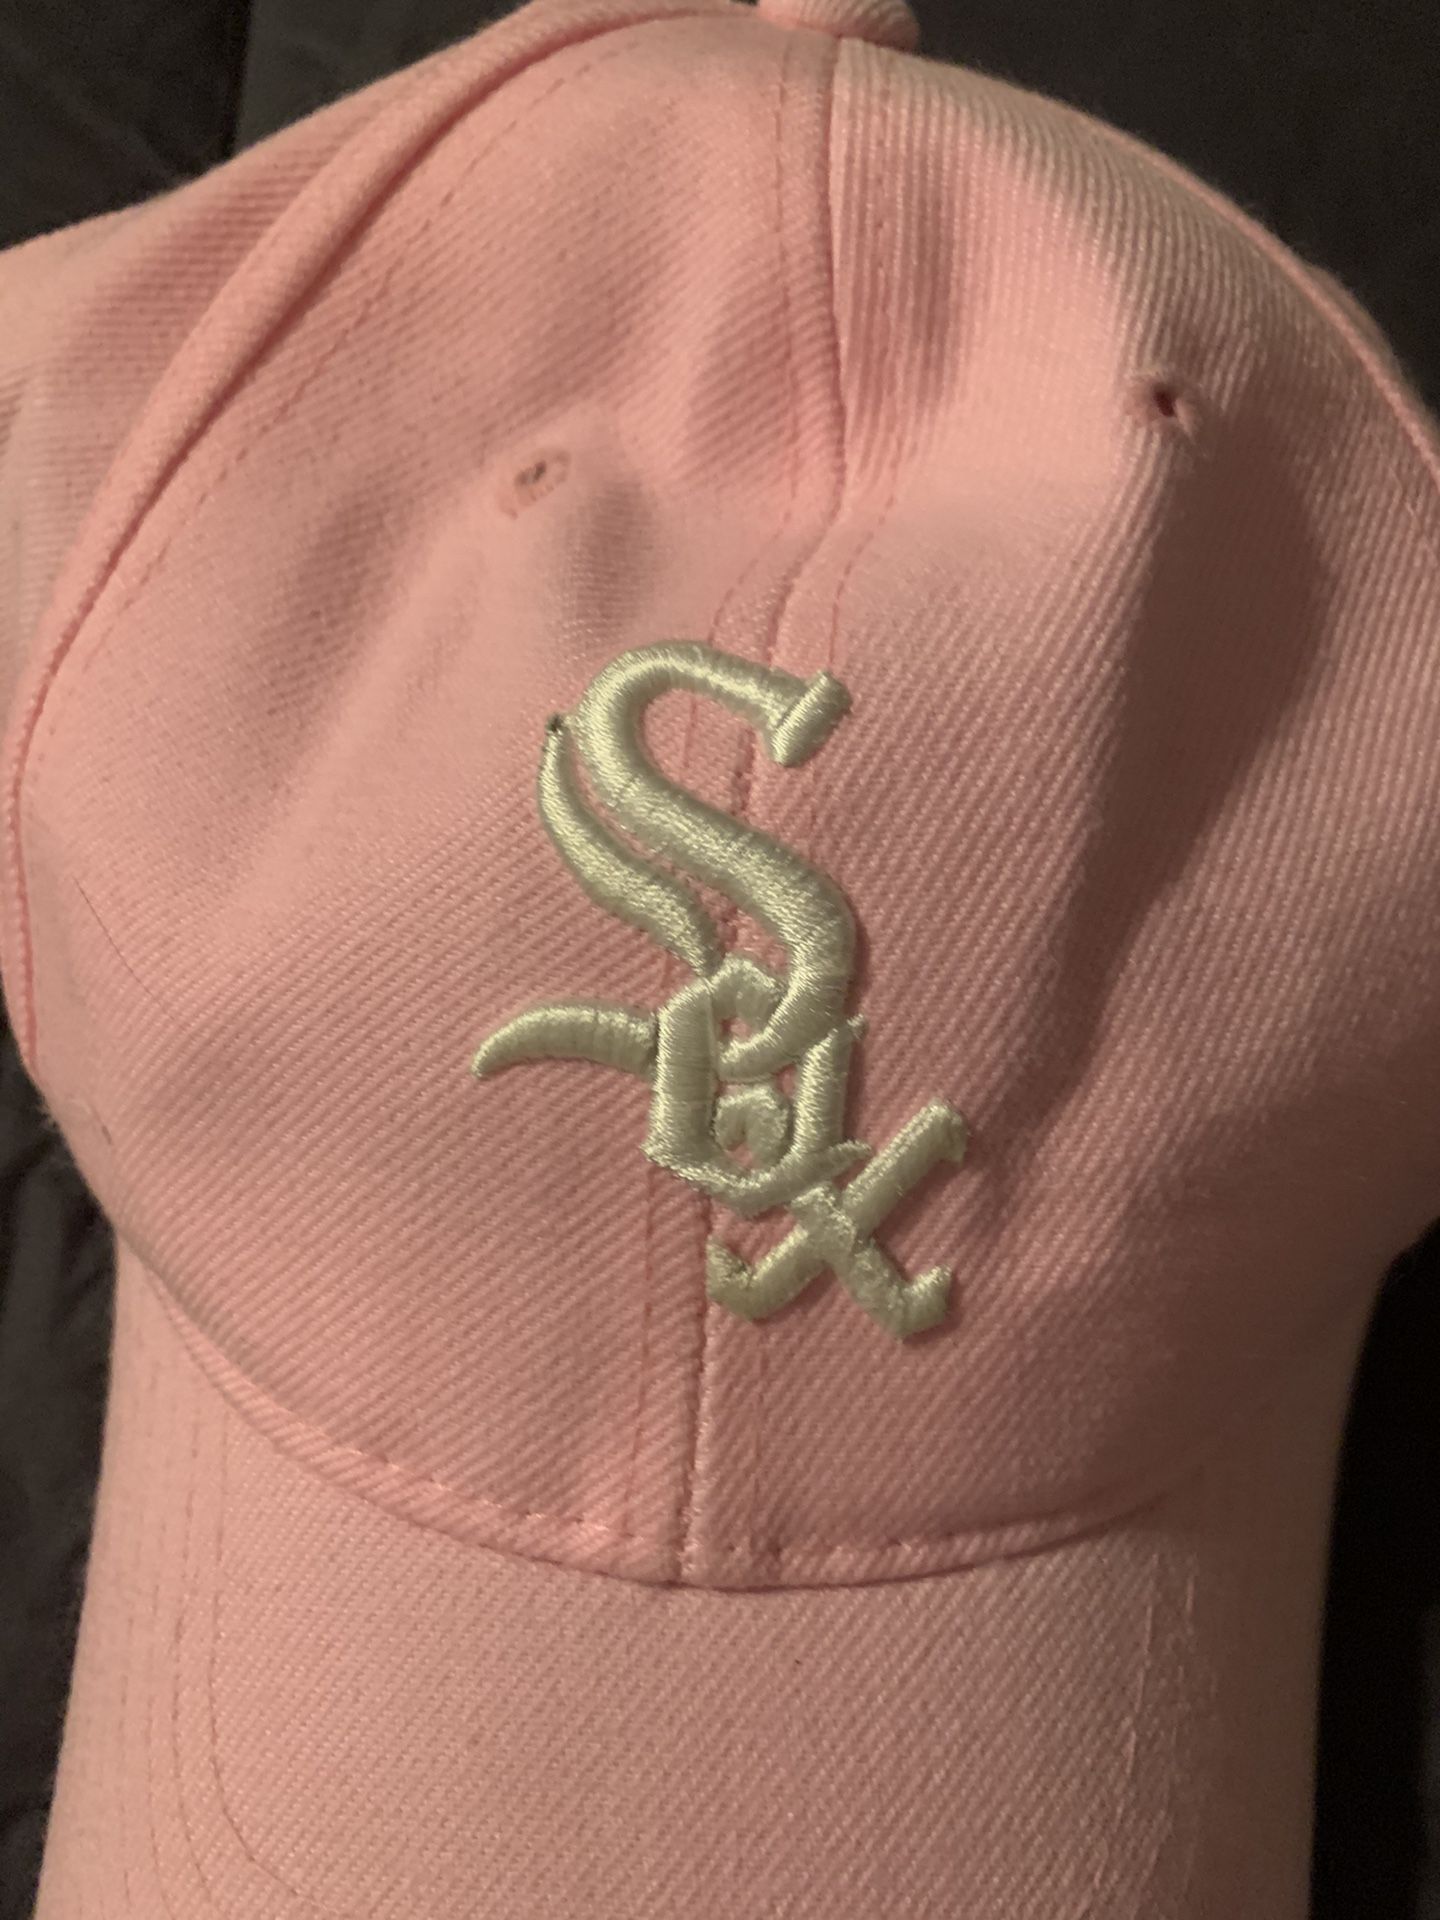 Brand new Chicago White Sox baseball hat pink with adjustable back